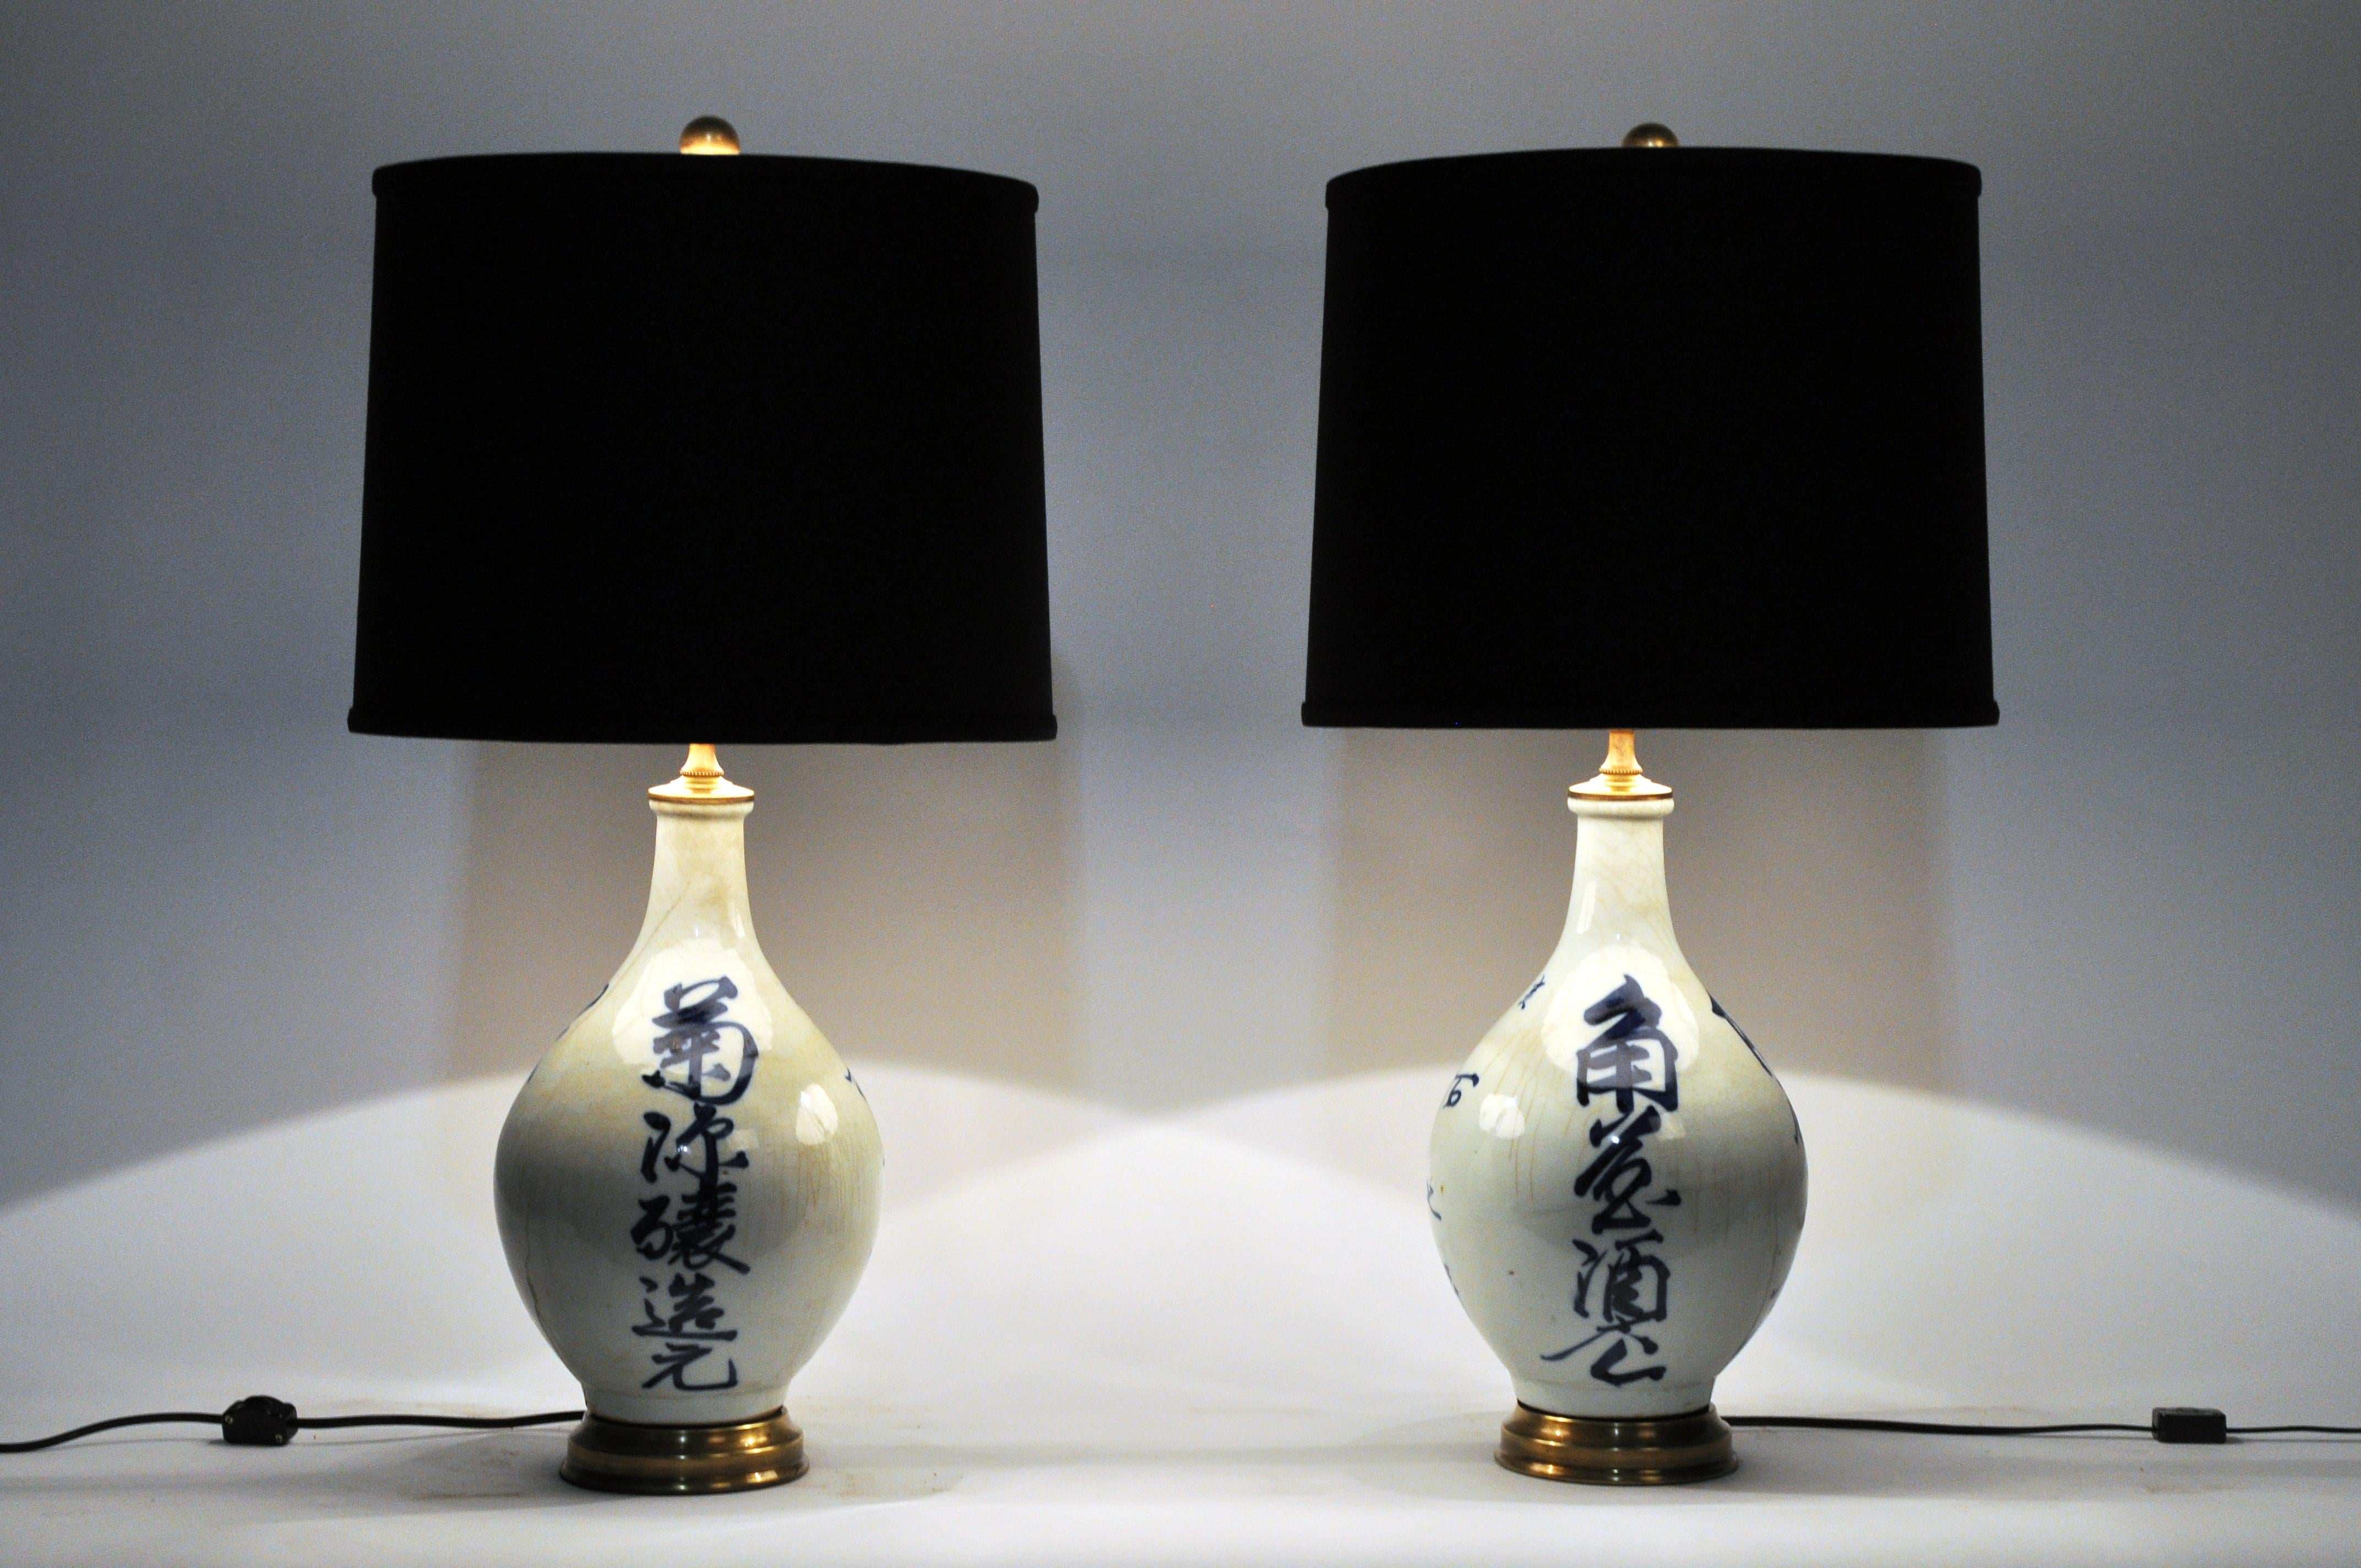 Japanese sake bottles make wonderful lamps --they're shiny, decorated with lovely calligraphy and have great presence without being too large. We selected bright brass fittings to complement the blue and white porcelain jars. These Japanese sake